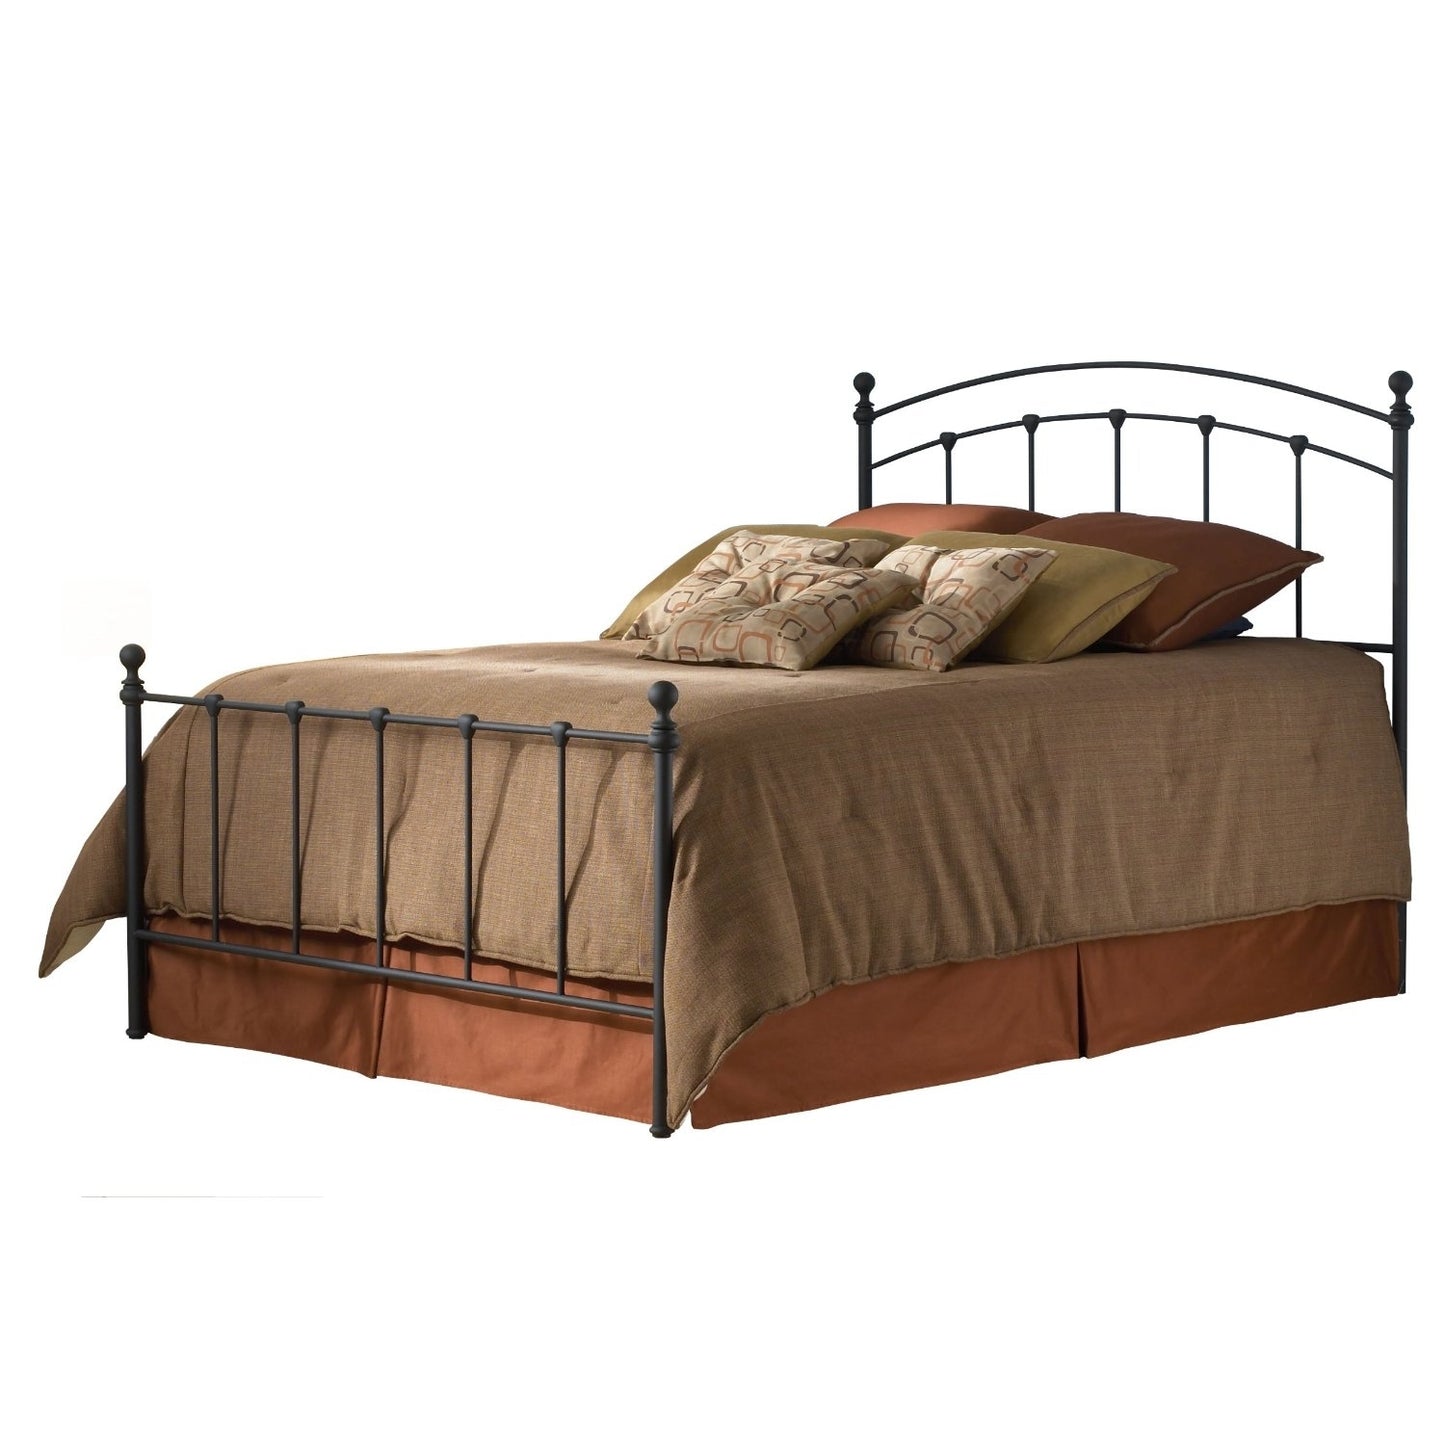 Queen size Metal Bed with Rounded Posts in Antique Brass Finish